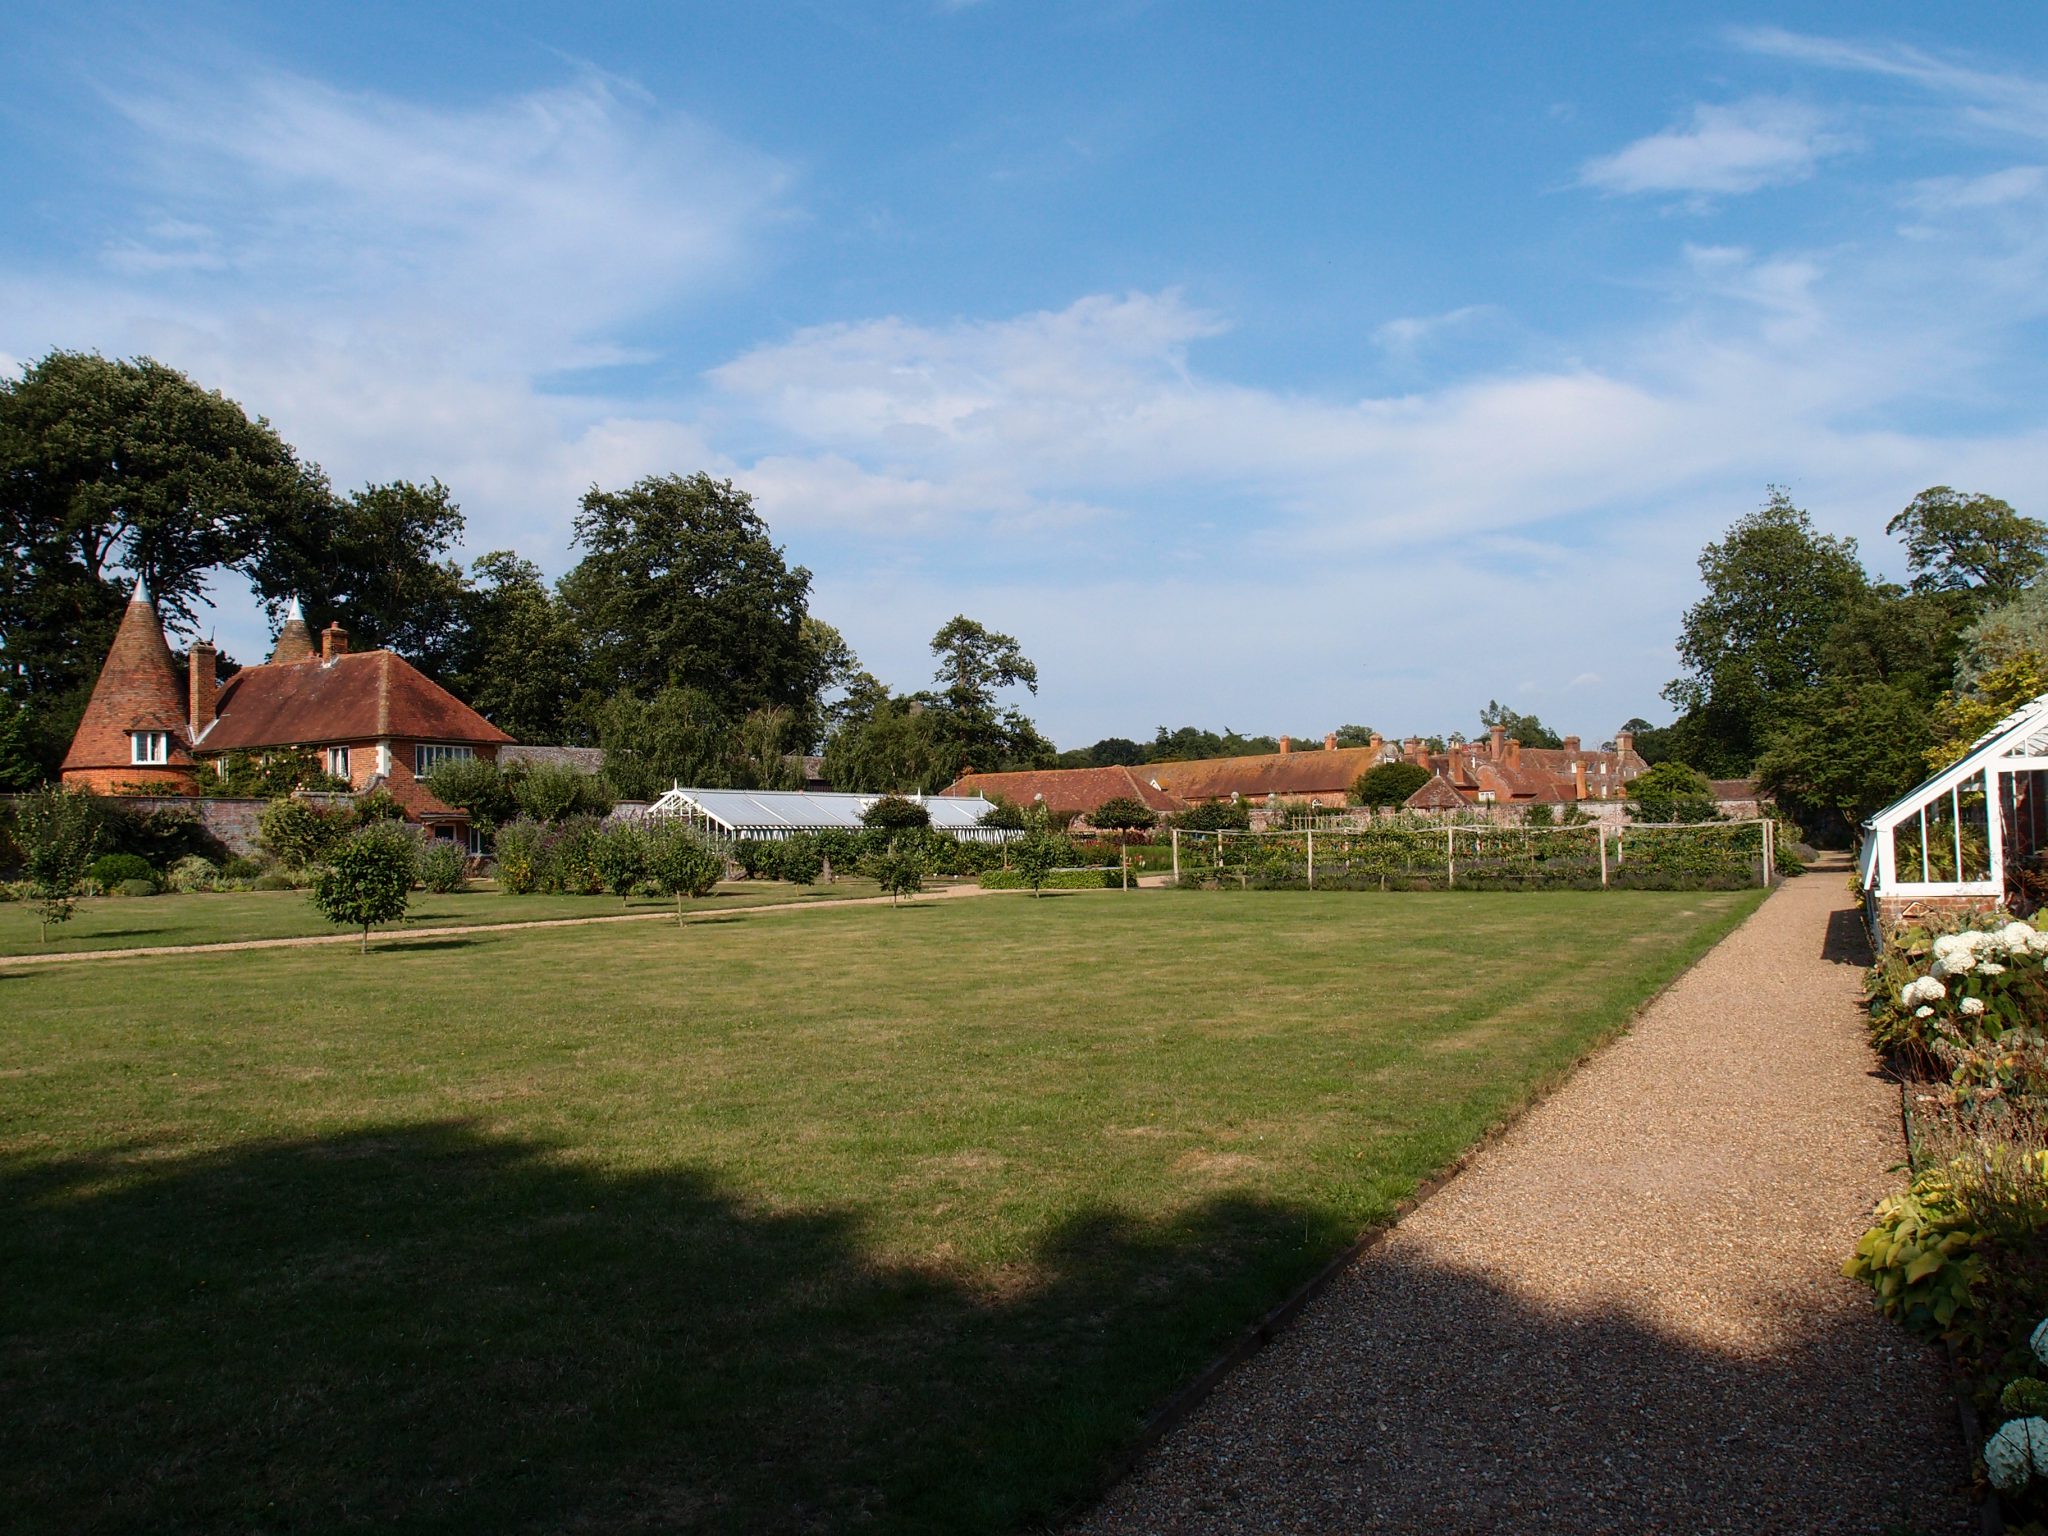 A view over the Walled Garden, as we stand in its southwest corner